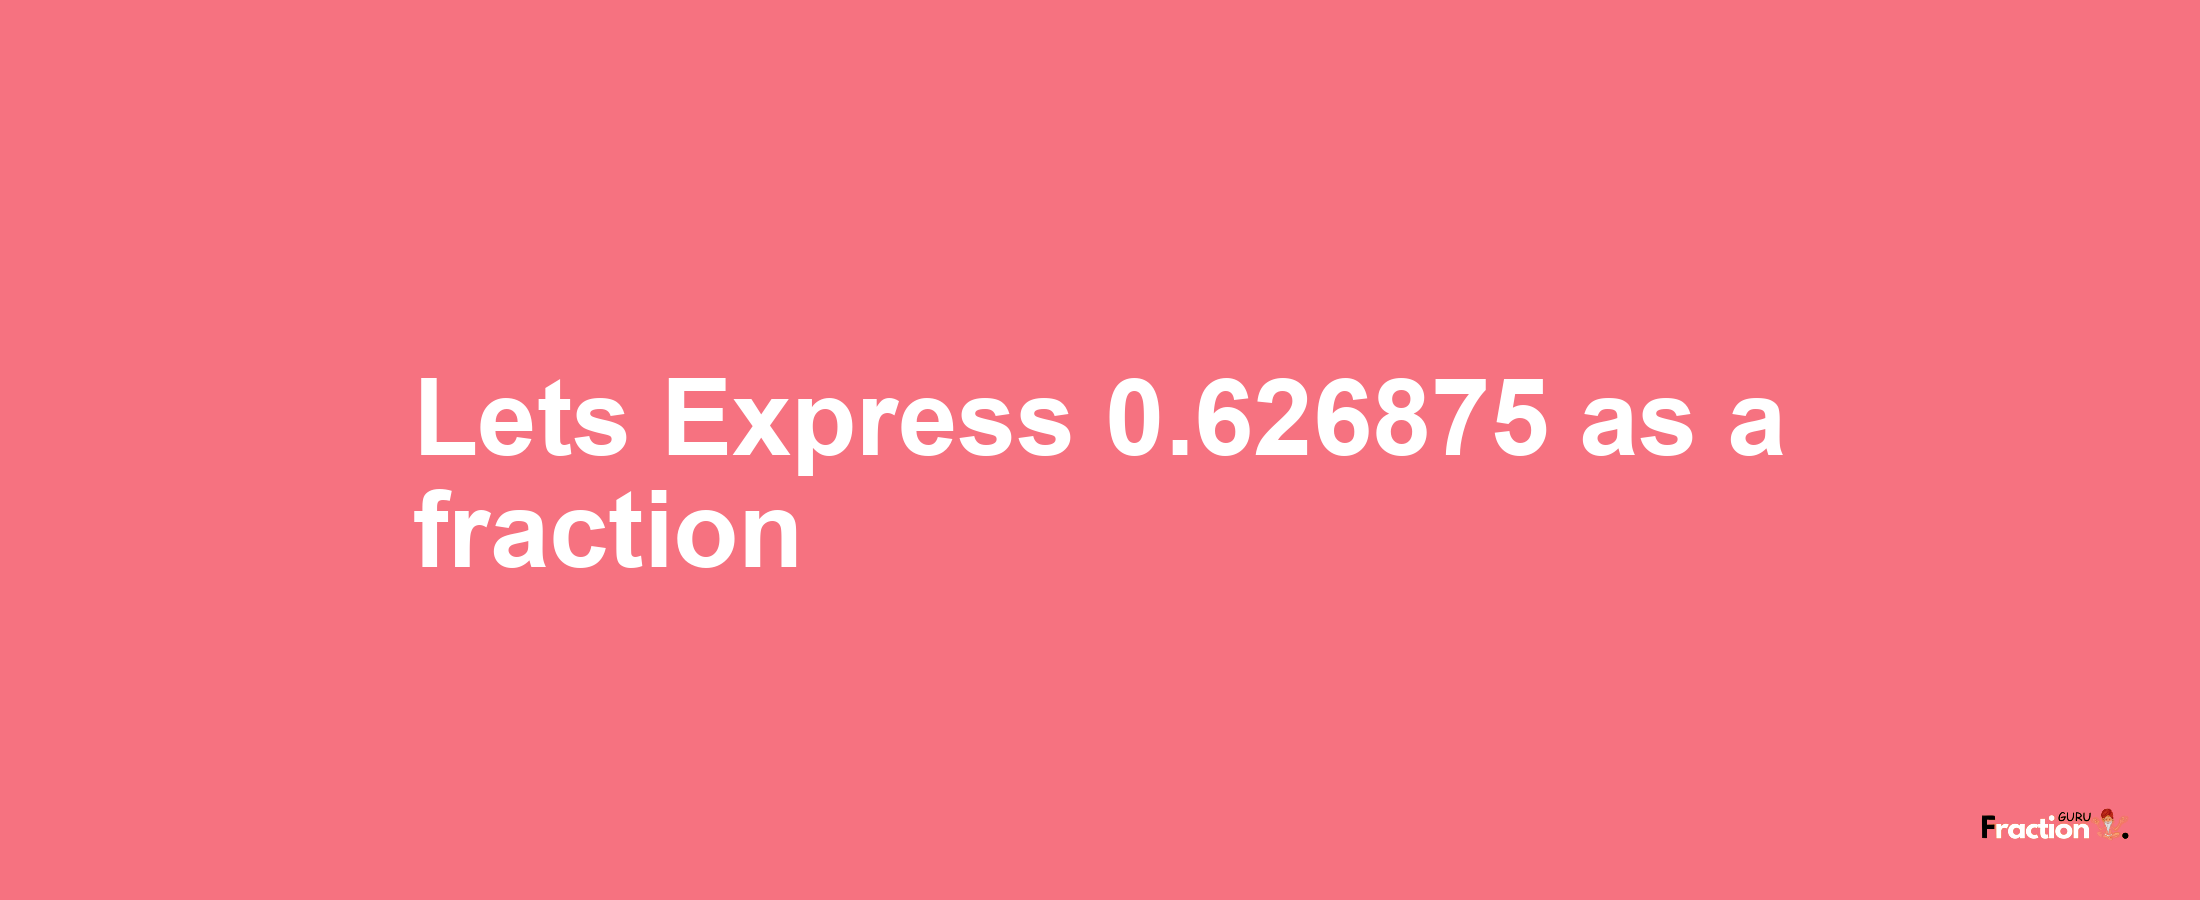 Lets Express 0.626875 as afraction